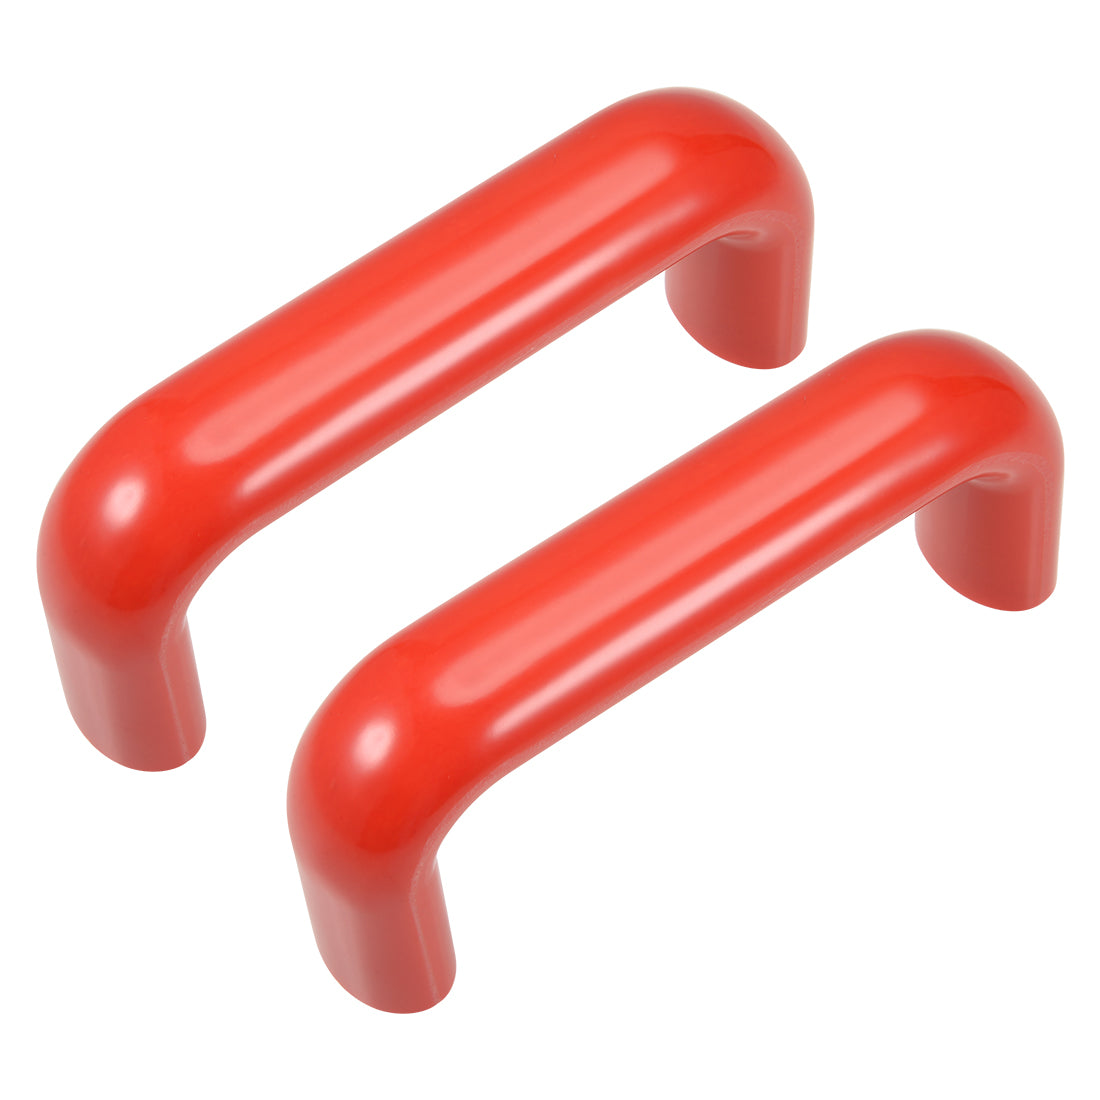 uxcell Uxcell Bakelite Plastic Pulls Handle 120mm Hole Centers Red for Industrial Machine 2Pcs